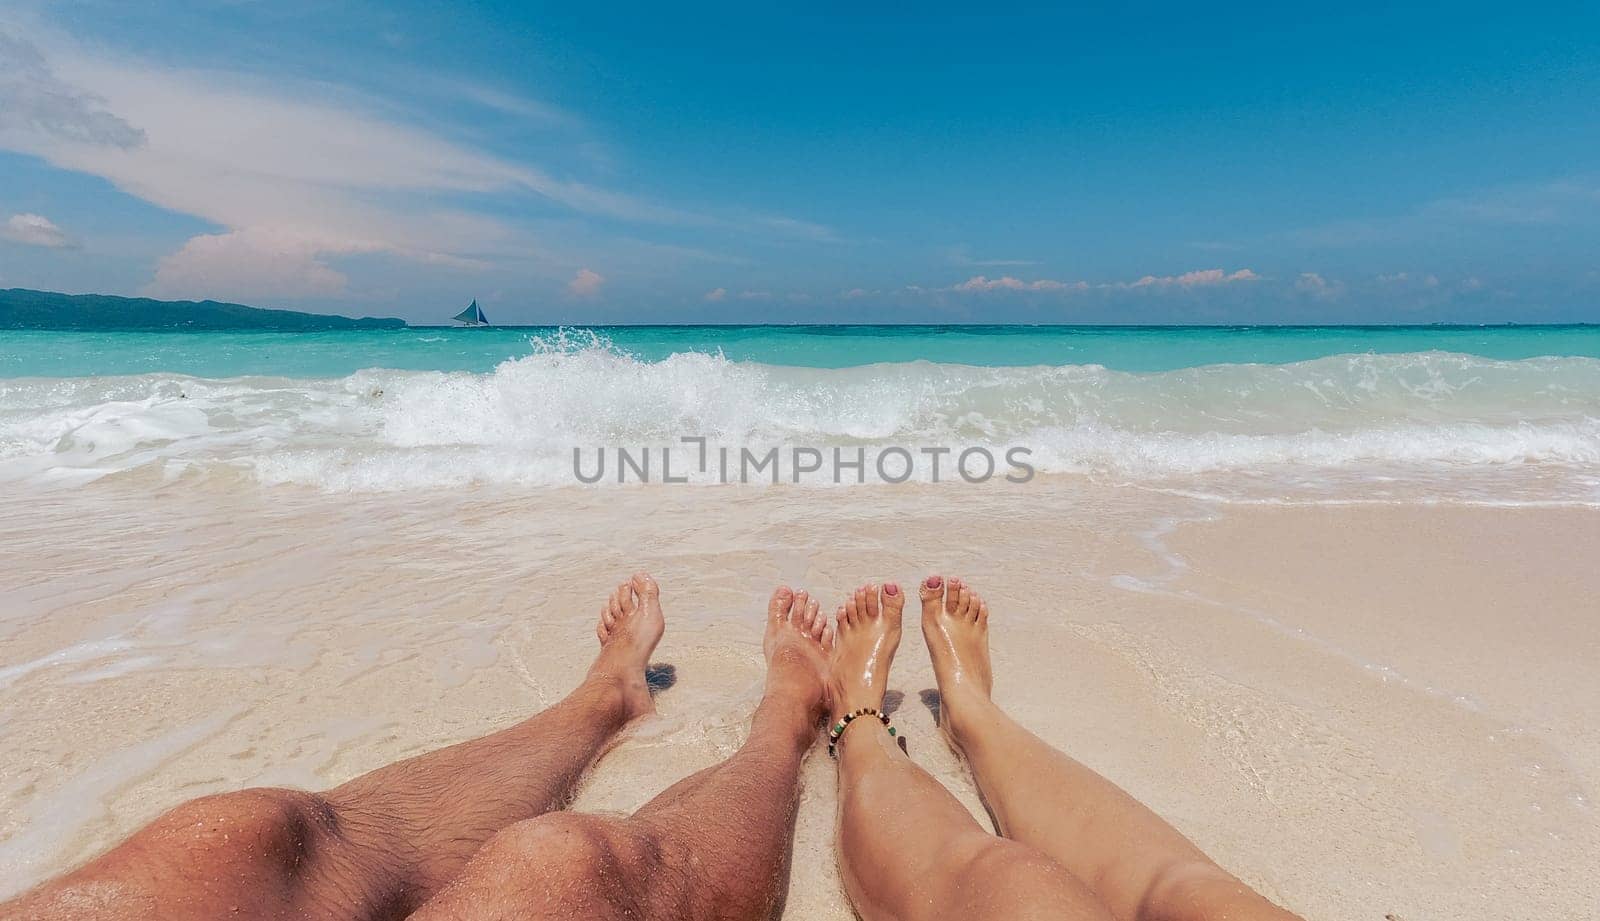 Relaxing couple enjoys serene beachfront view under clear blue skies. Boracay, Philippines. by Busker